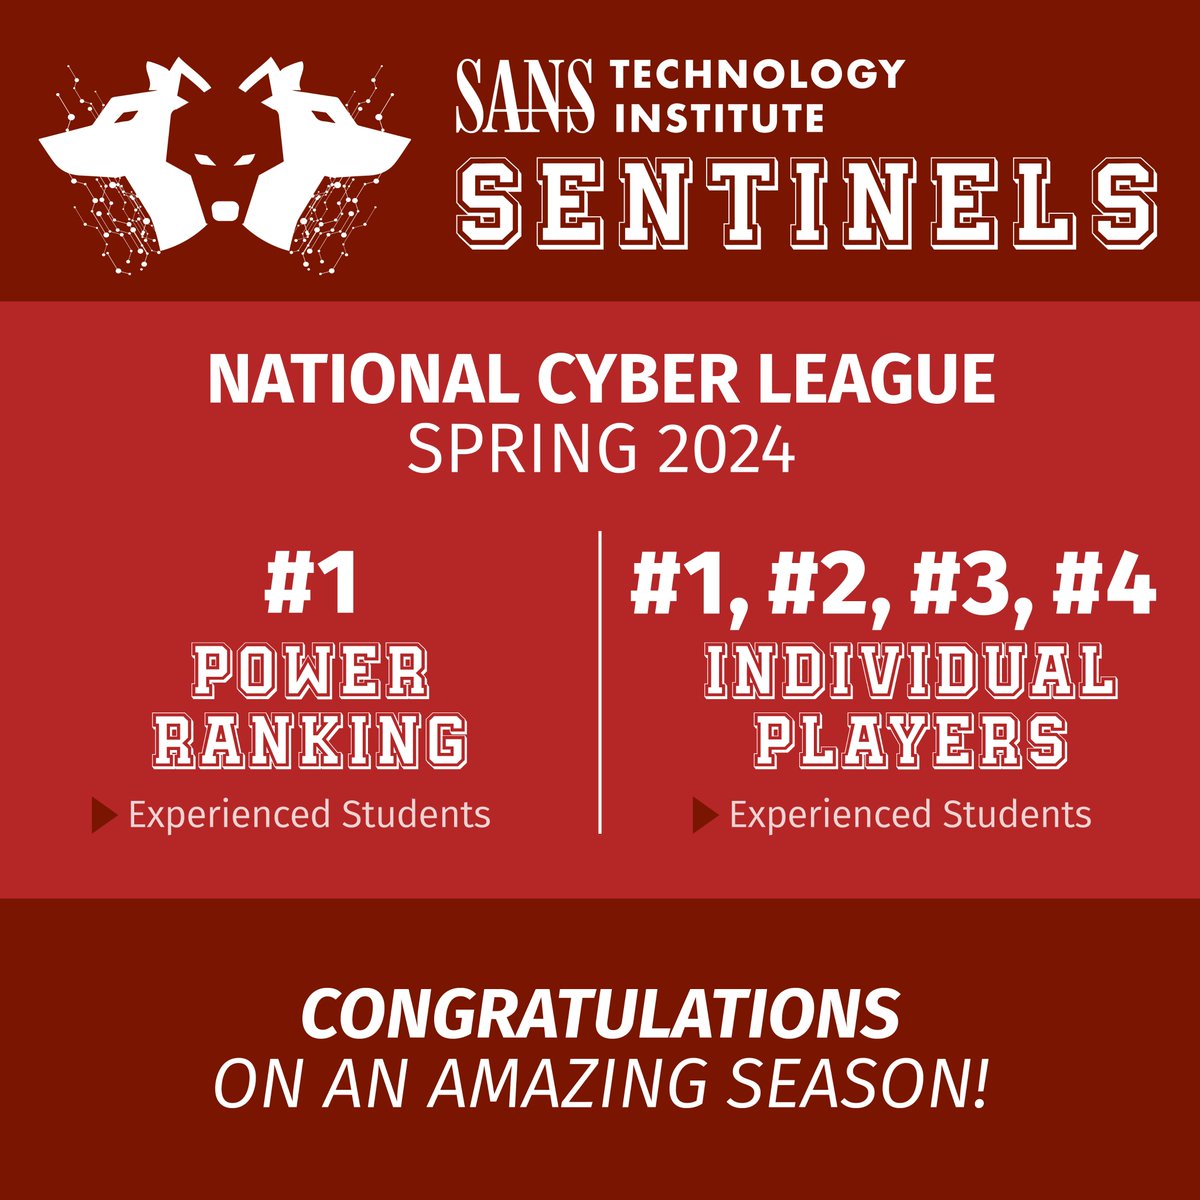 Victory Alert: SANS.edu Sentinels showcased unmatched talent in the Spring 2024 @NatlCyberLeague Experienced Student Bracket. 🥇 #1 Power Ranking 🏆 Top 4 Individual Players 👨‍💻 32 of the Top 100 Players Congrats to our champions!